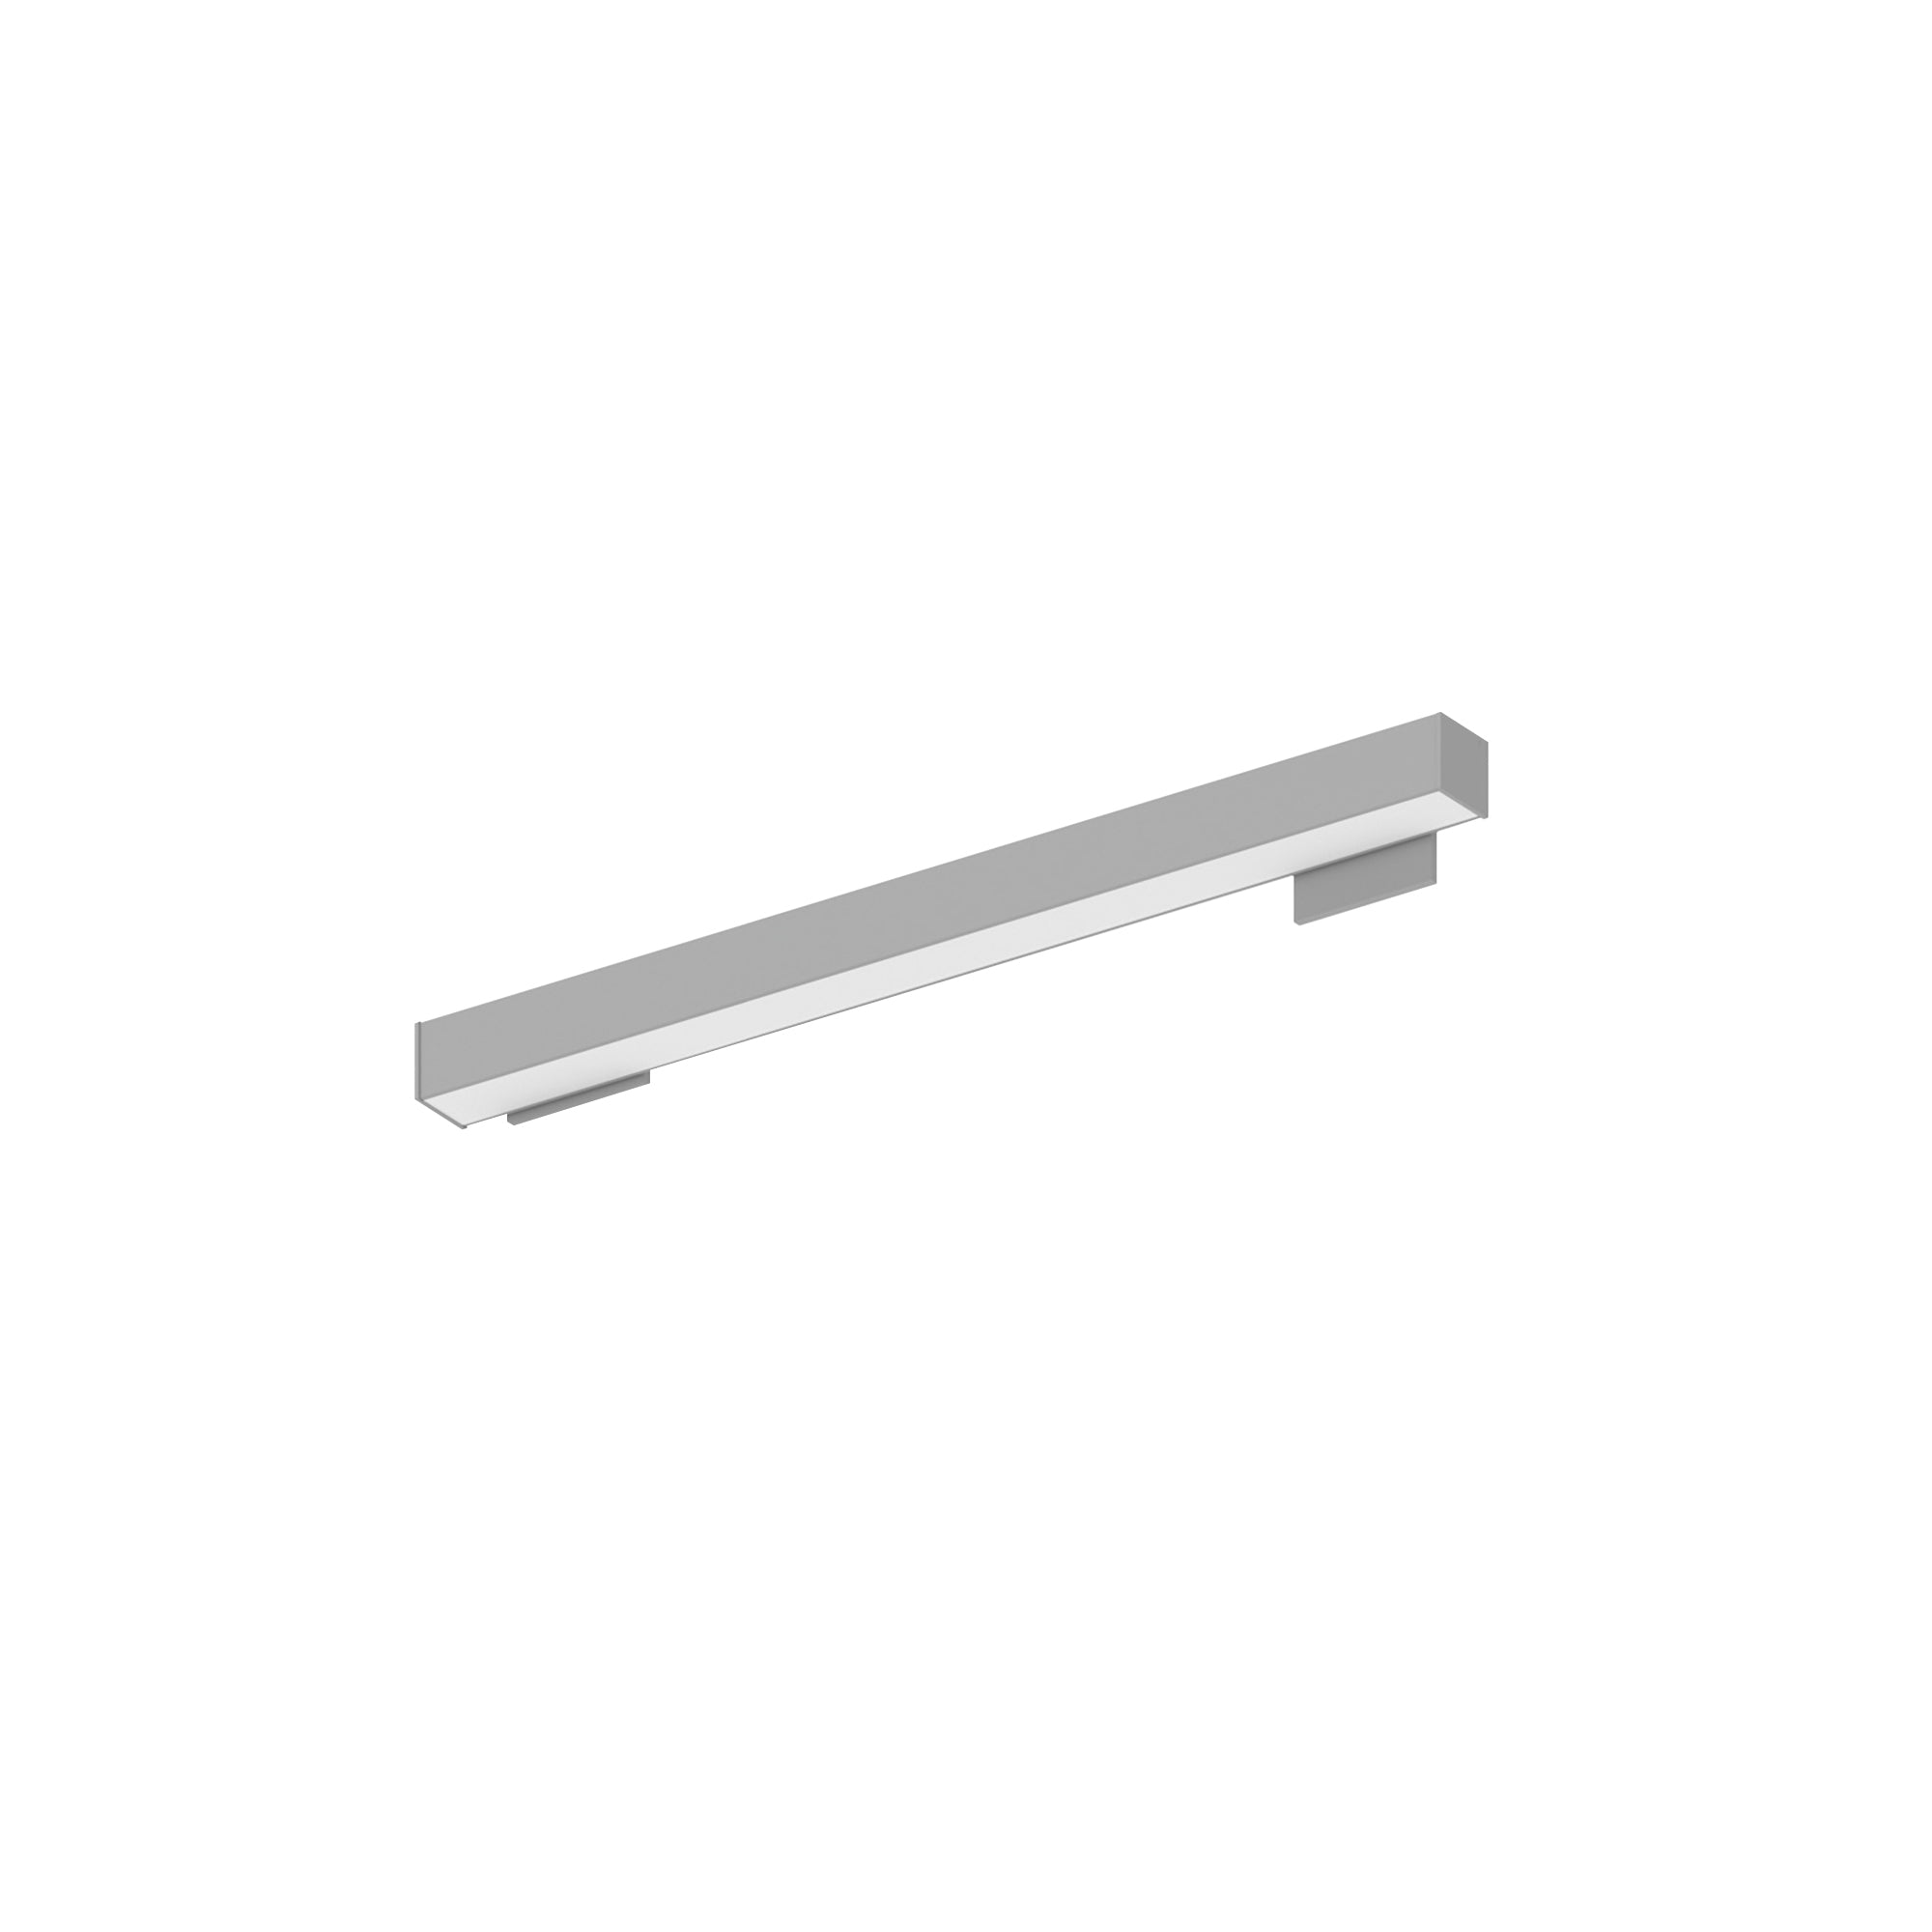 Nora Lighting NWLIN-21030A/L2-R4 - Linear - 2' L-Line LED Wall Mount Linear, 2100lm / 3000K, 2 Inchx4 Inch Left Plate & 4 Inchx4 Inch Right Plate, Aluminum Finish